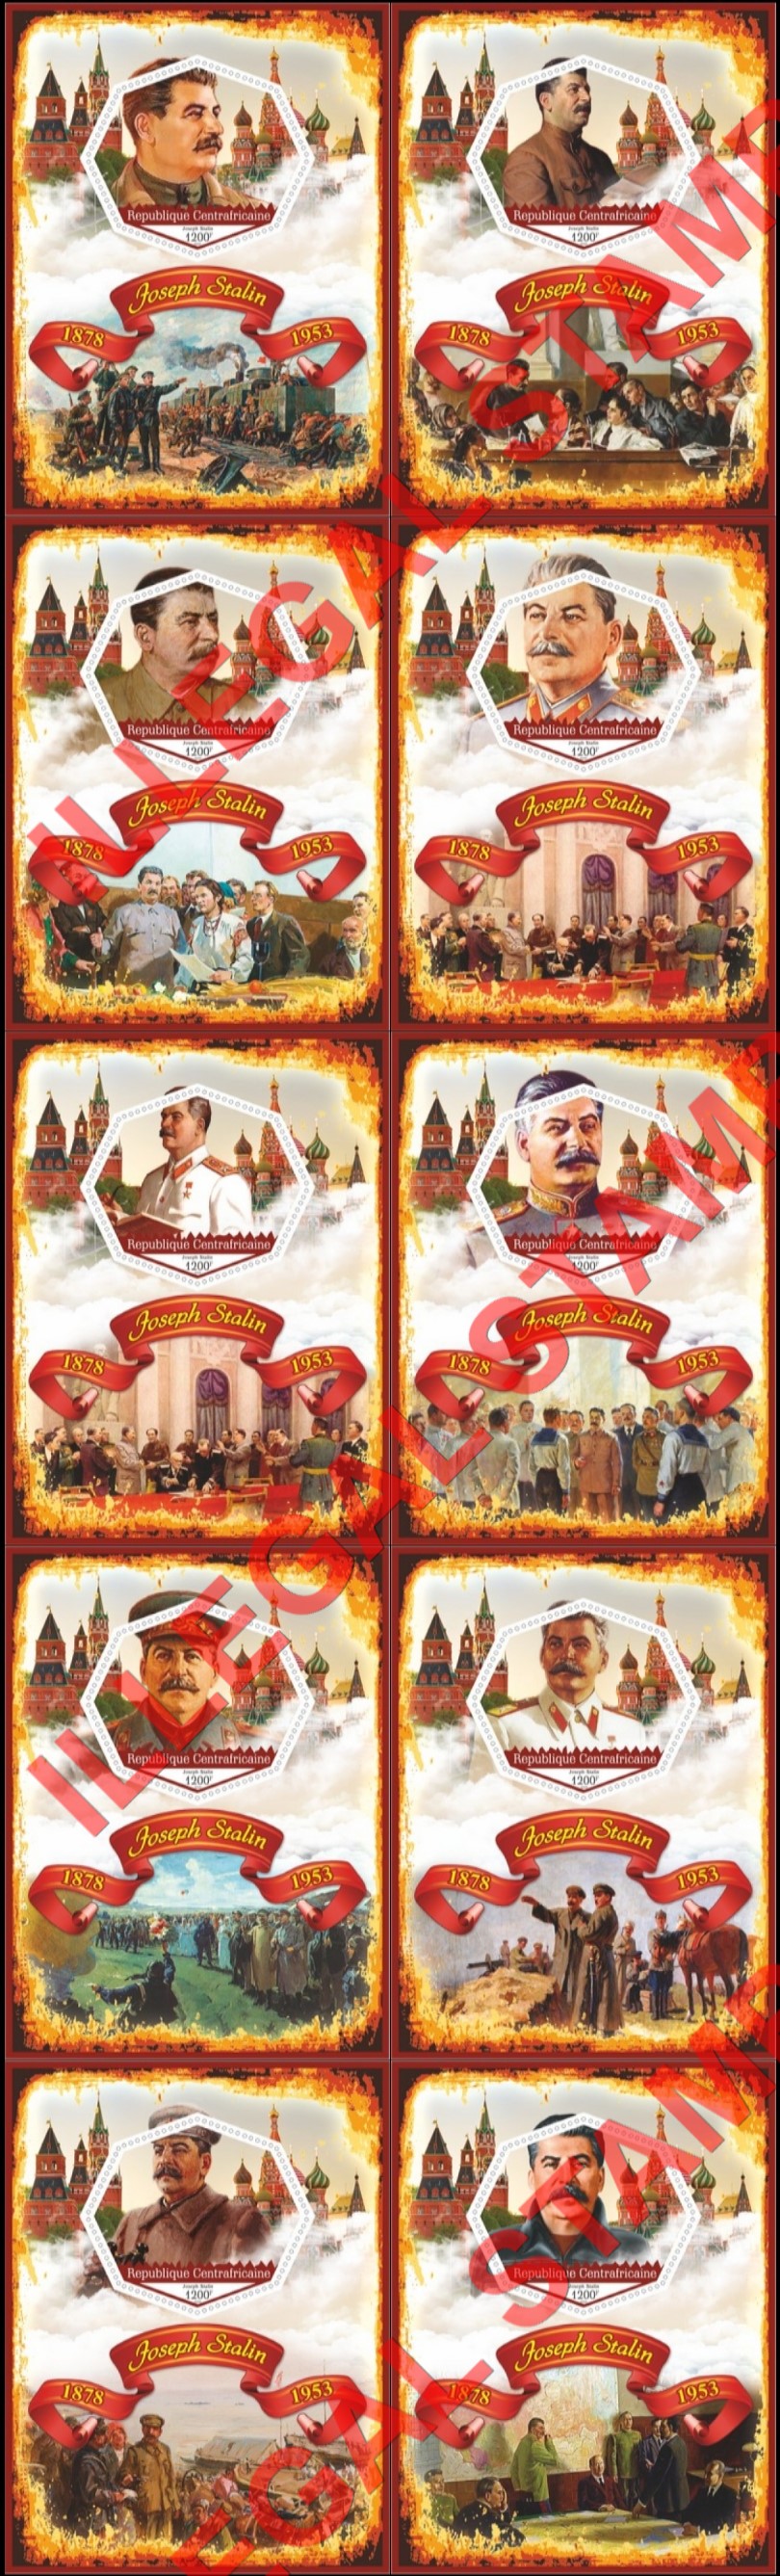 Central African Republic 2020 Joseph Stalin (different) Illegal Stamp Souvenir Sheets of 1